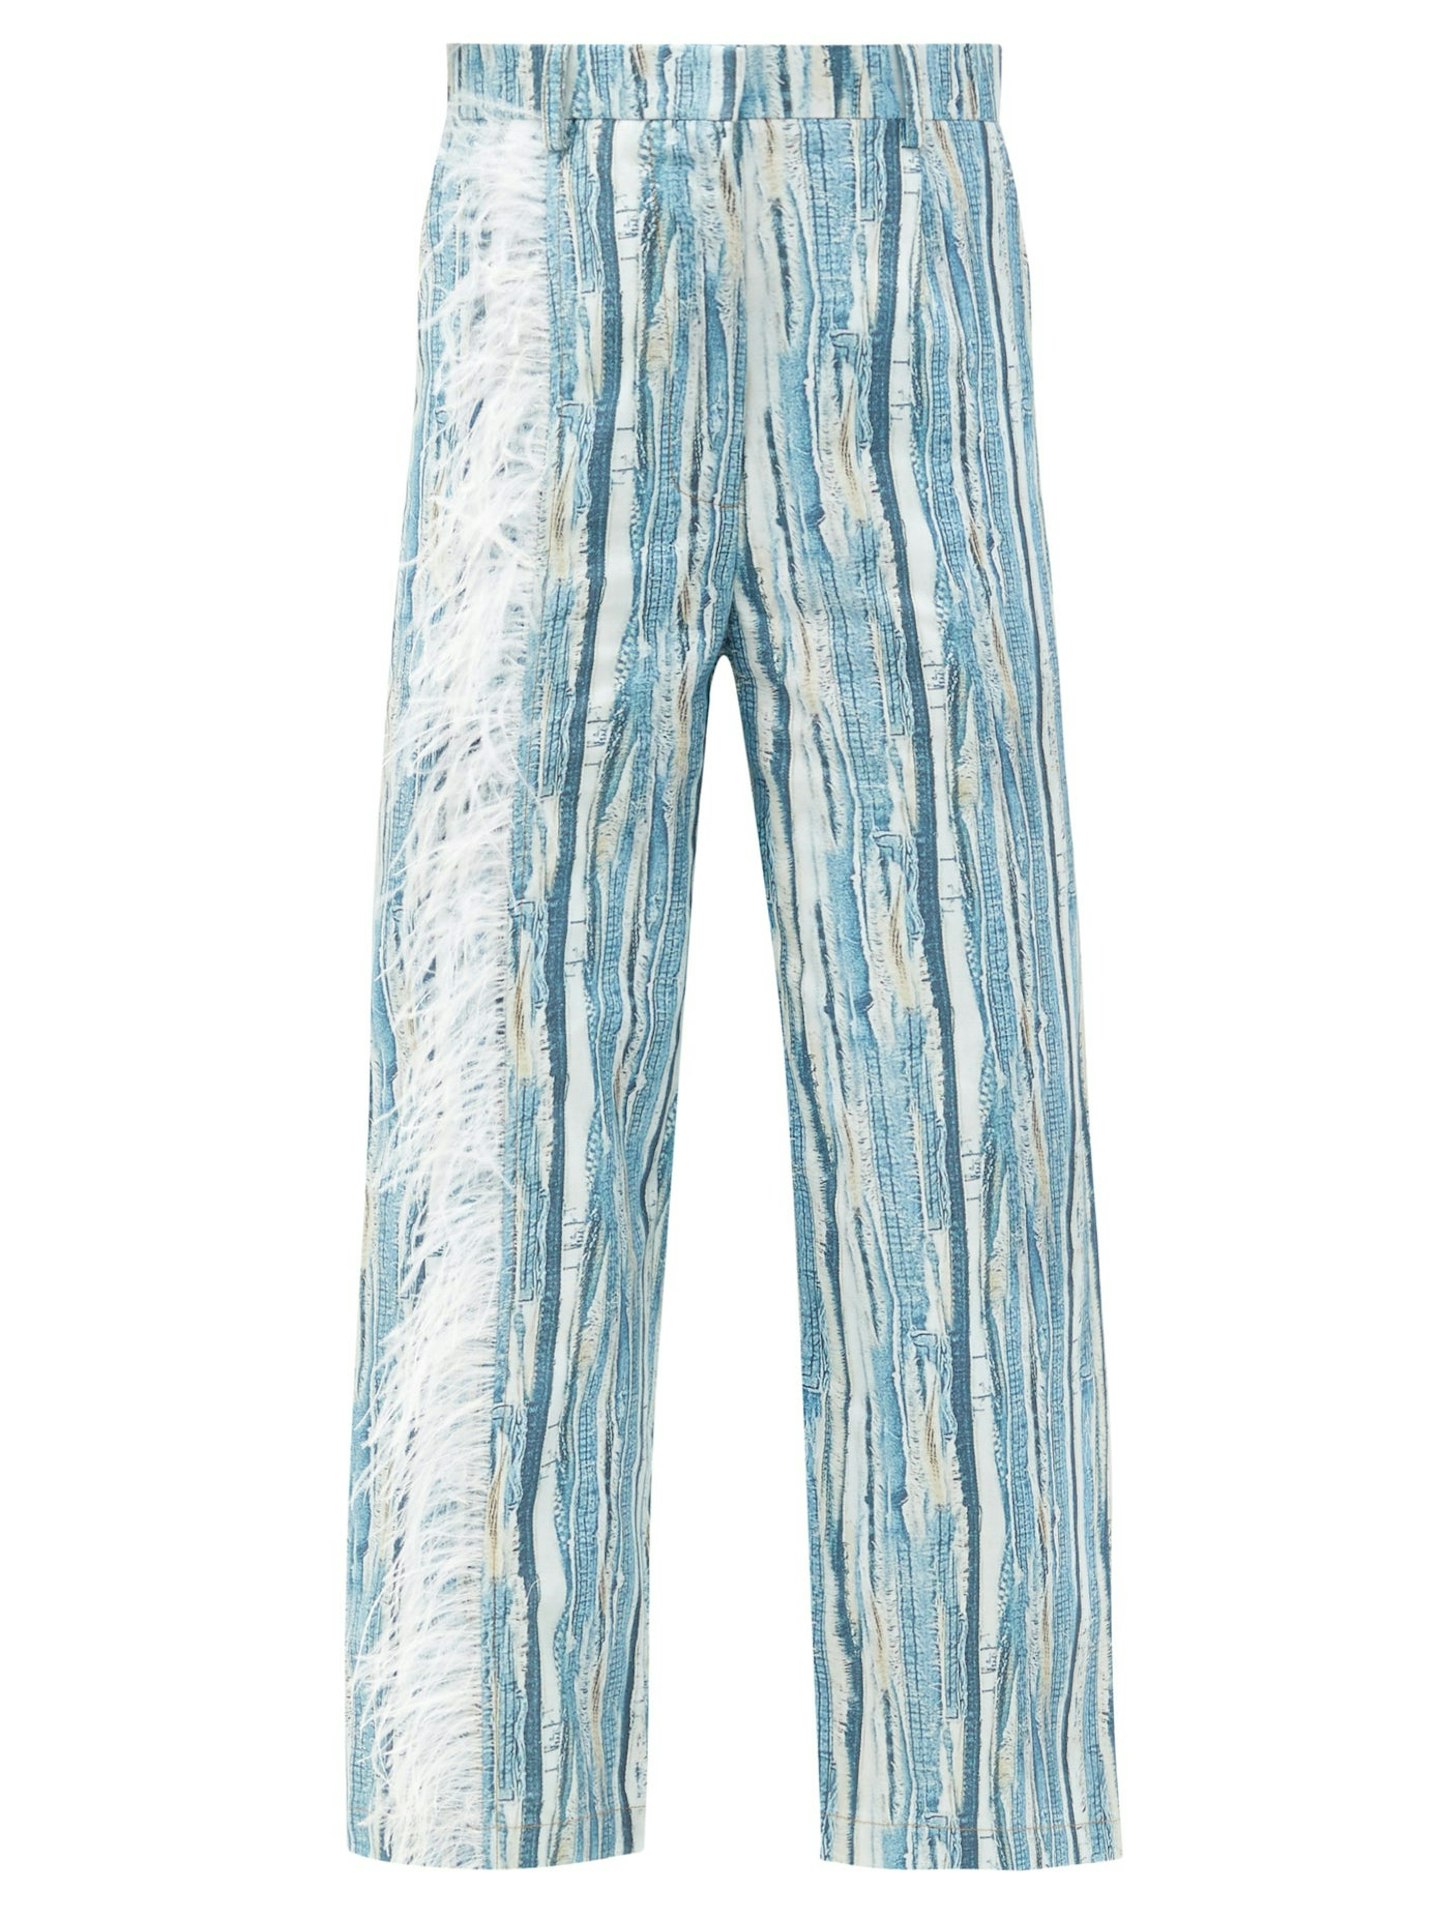 Thebe Magugu, Feather-Trimmed Shredded Denim-Print Cotton Jeans, WAS £540 NOW £270